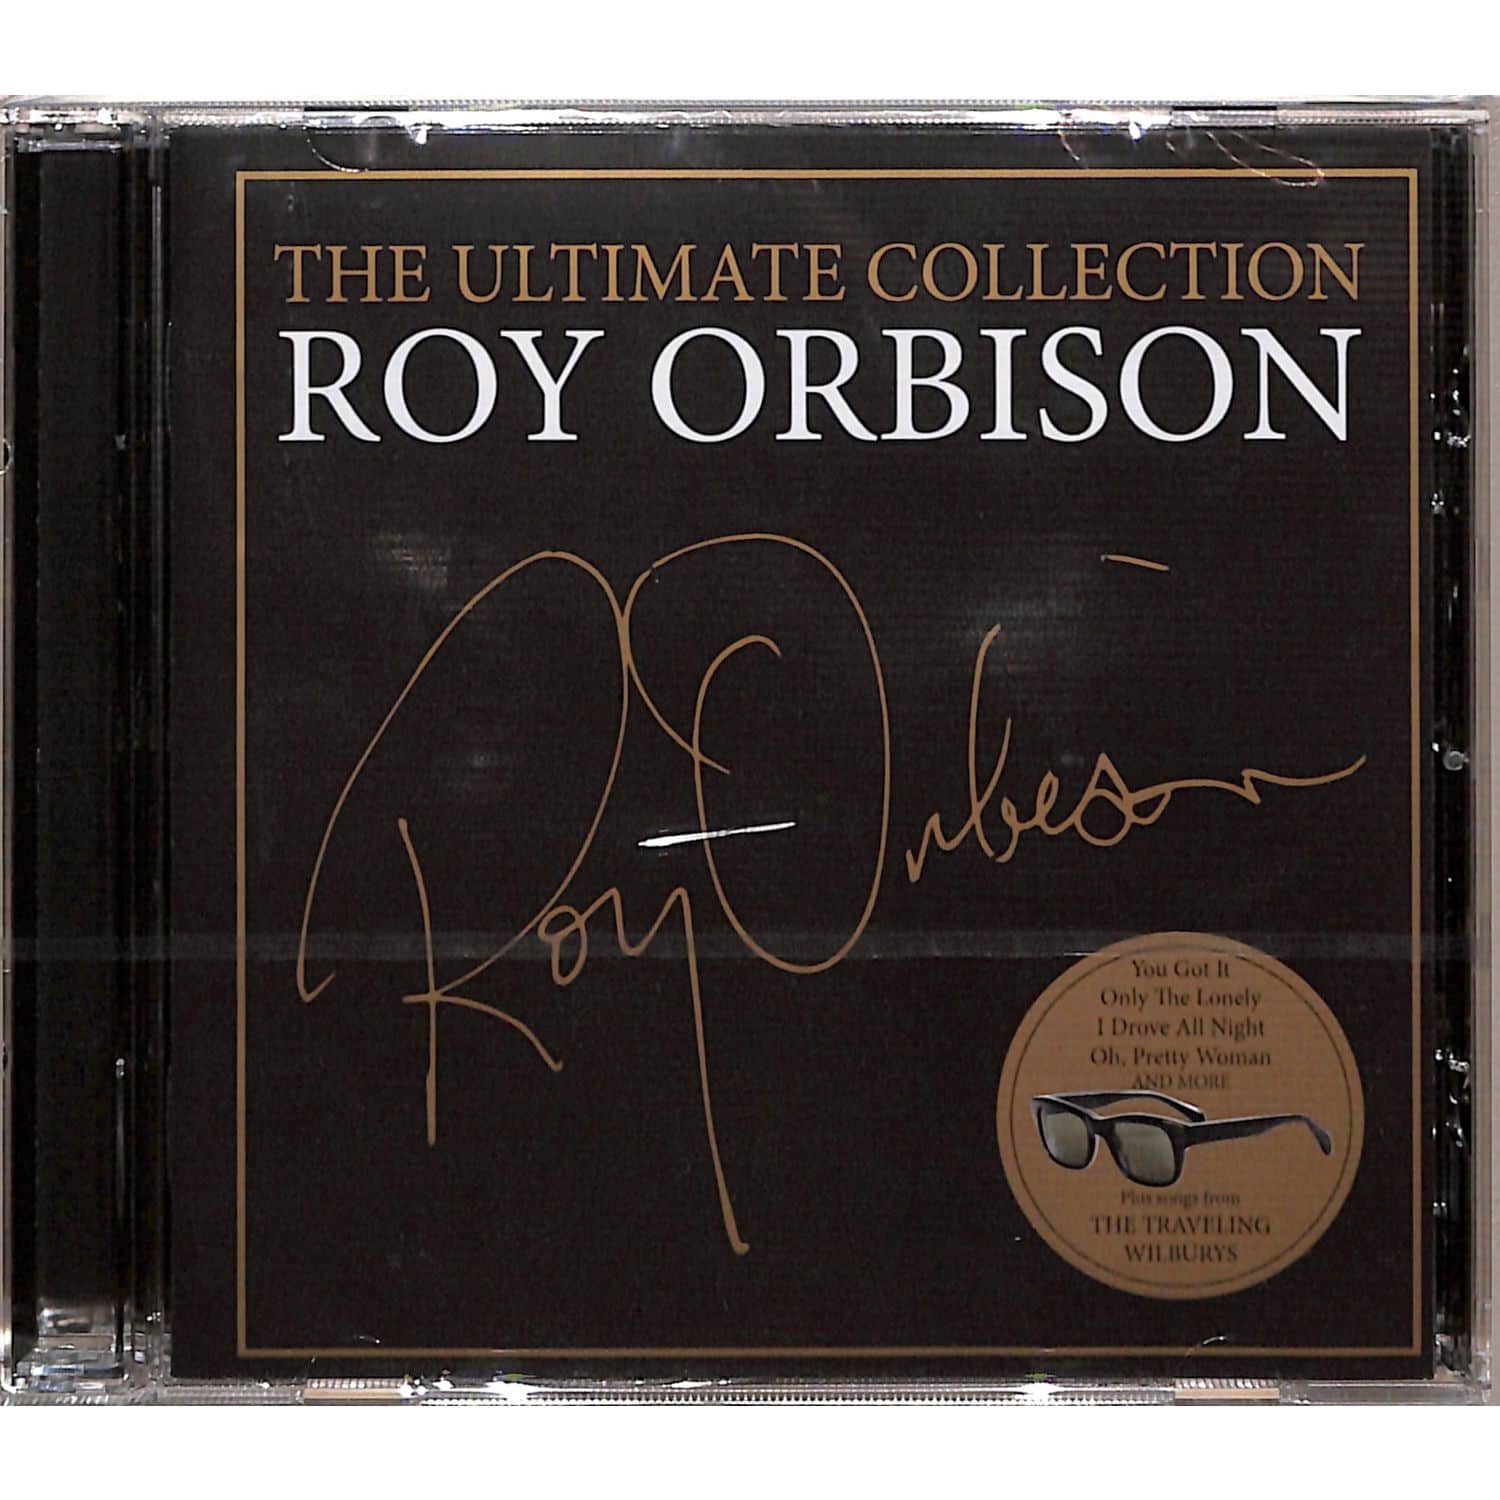 Roy Orbison - THE ULTIMATE COLLECTION 